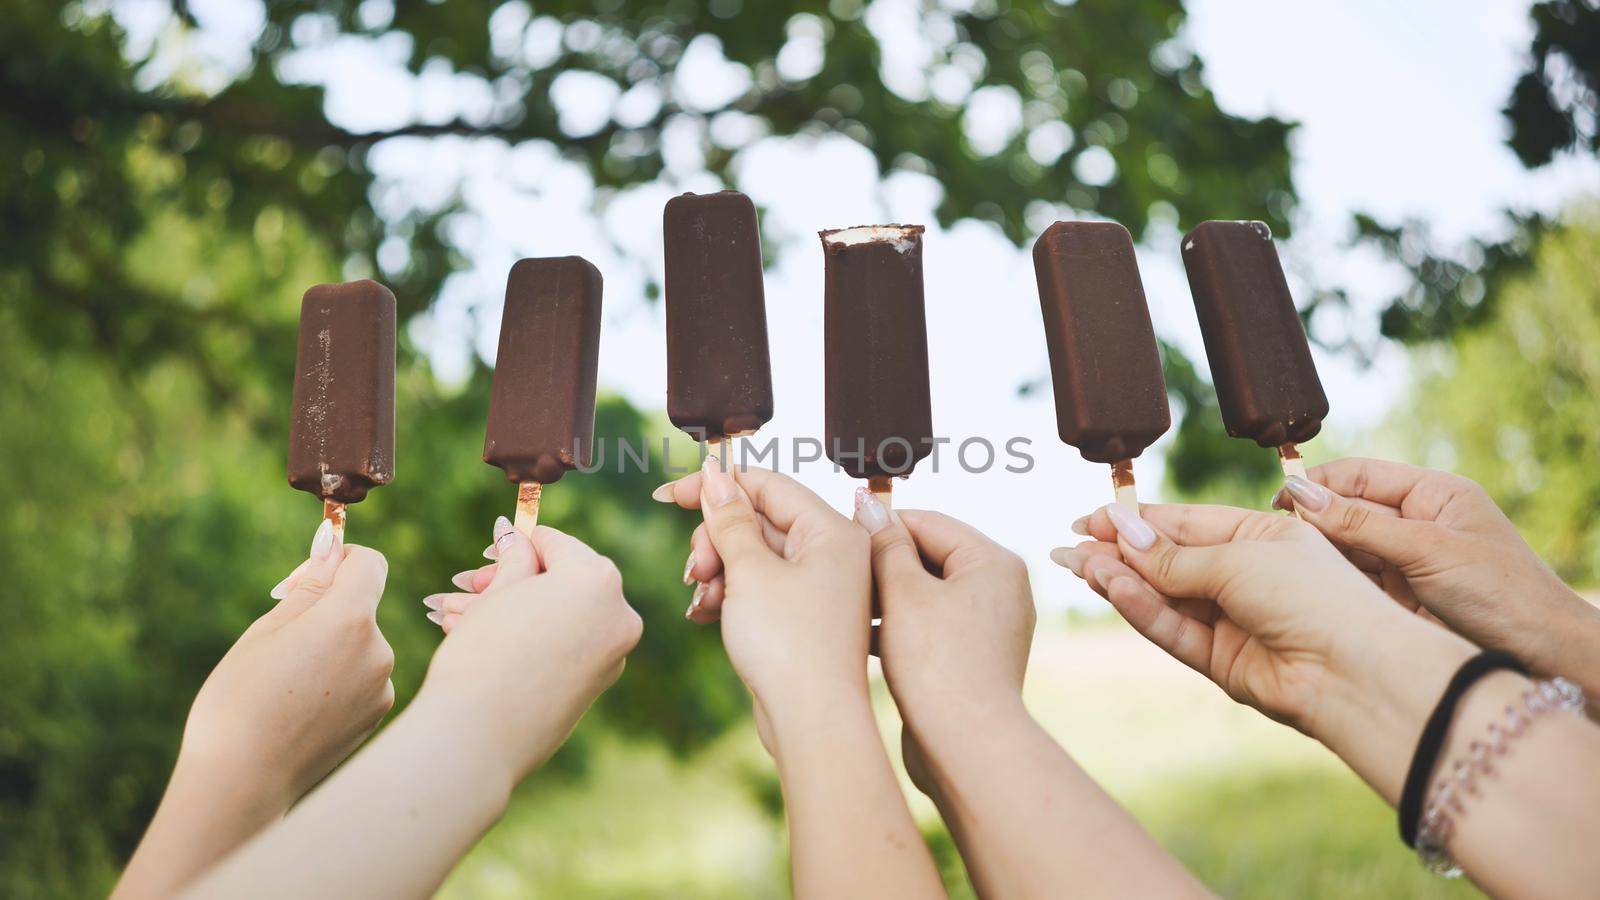 Friends hold chocolate ice cream on a stick in a row. by DovidPro